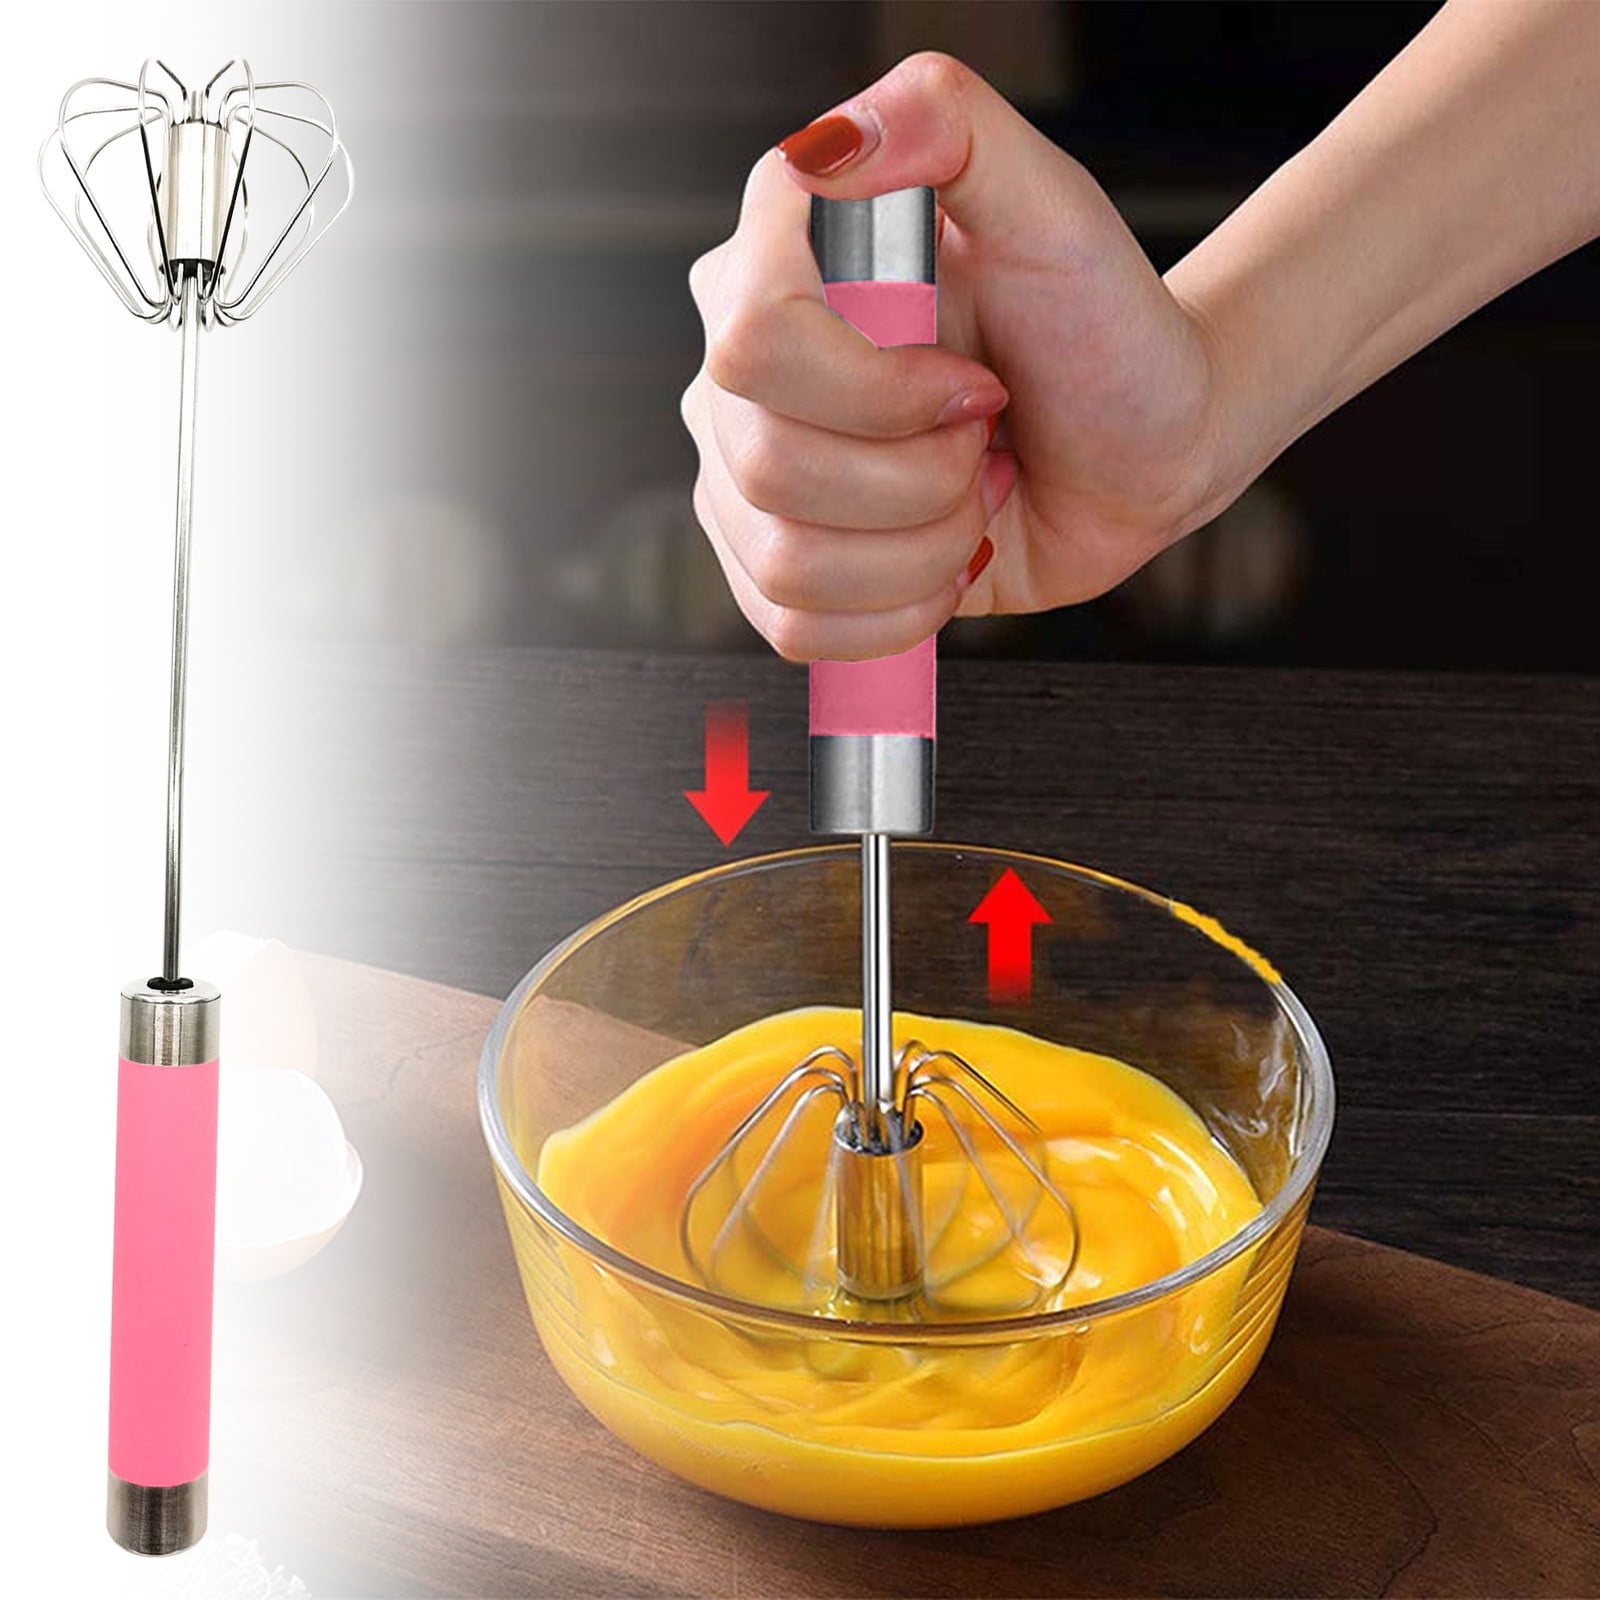 Stainless Steel Whisks Semi-automatic Egg Whisk Beater Mixer to Make Froth  Foam Whipped Cream Self Turning Utensils for Baking